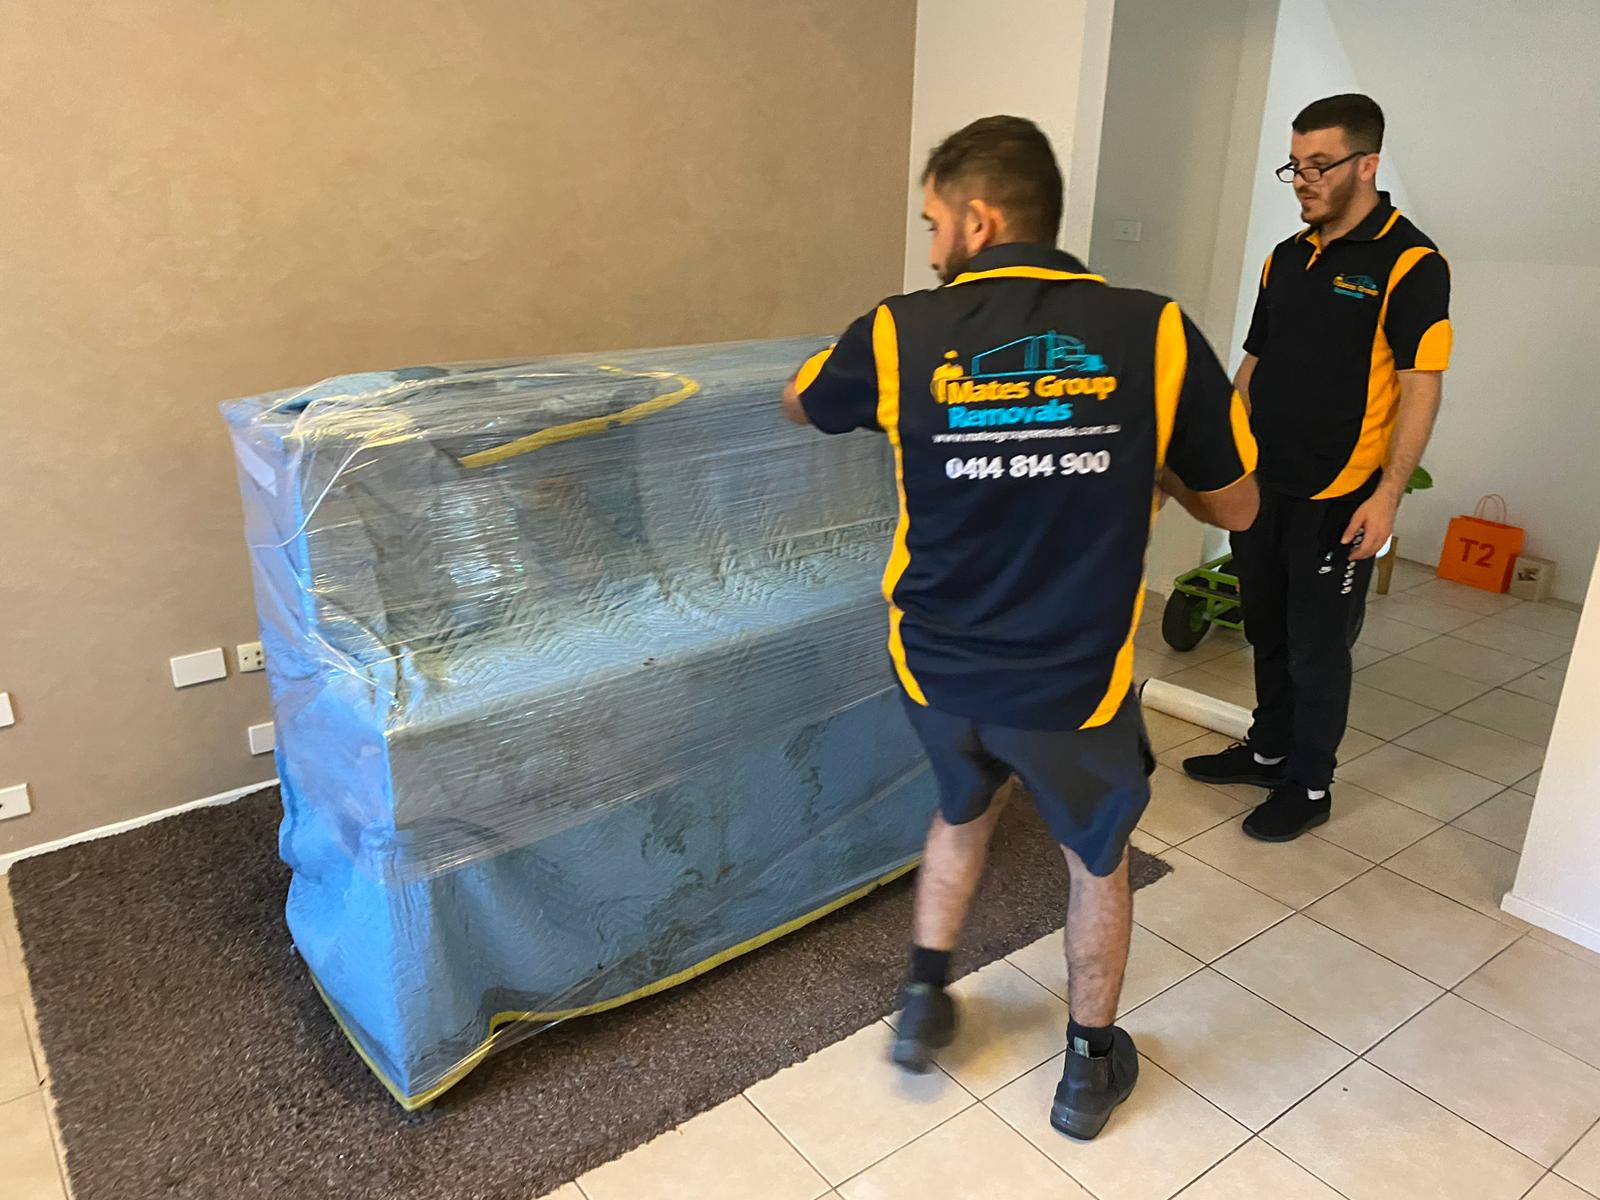 cheap and professional removalists sydney